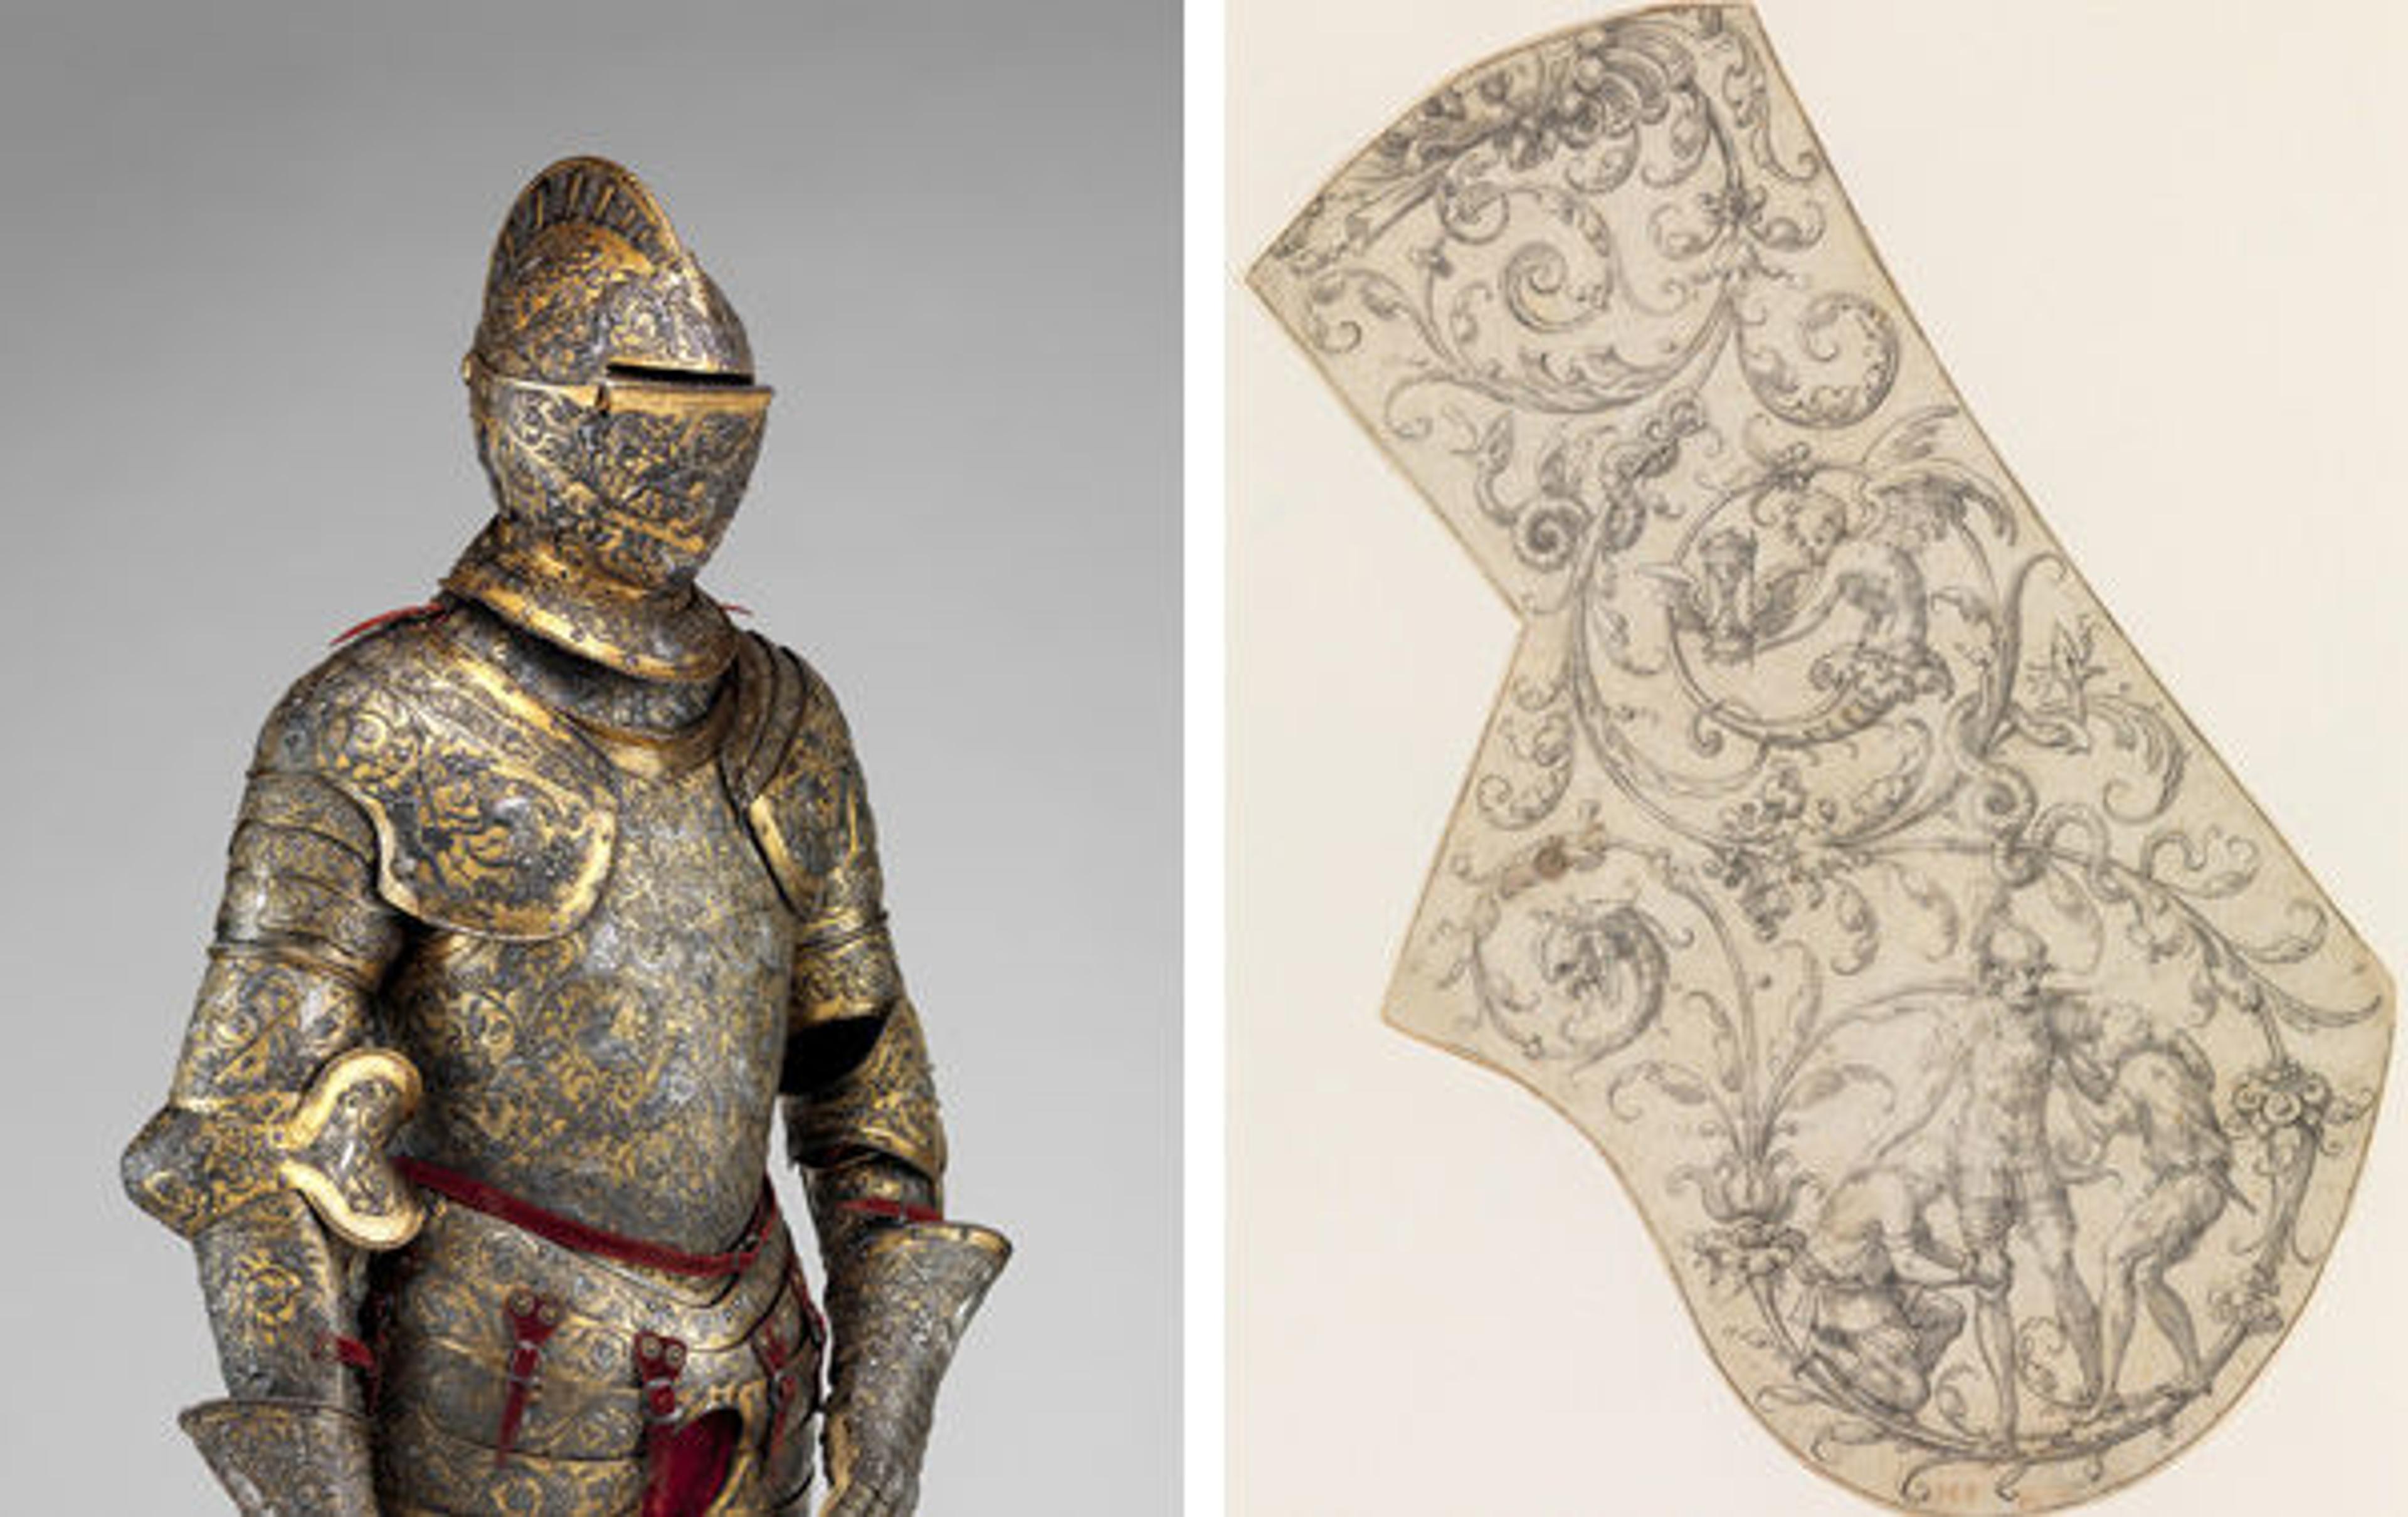 Left: fig. 1. Armor of Henry II of France (reigned 1547–59), ca. 1555. French, possibly Paris. Steel, silver, gold; H. 74 (187.96 cm); Wt. 53 lb. 4 oz. (24.20 kg). The Metropolitan Museum of Art, New York, Harris Brisbane Dick Fund, 1939 (39.121a–n) Right: fig. 2. Attributed to Étienne Delaune (French, 1518–83) or attributed to Jean Cousin the Elder (French, ca. 1490–ca. 1560). Design for the Right Pauldron of a Parade Armor, ca. 1555. French, Paris. Pen and ink with watercolor wash on paper; Greatest length, 10 in. (25.4 cm) greatest width, 6 17/32 in. (16.6 cm) shortest width, 3 47/64 in. (9.5 cm). The Metropolitan Museum of Art, New York, Rogers Fund, 1954 (54.173)